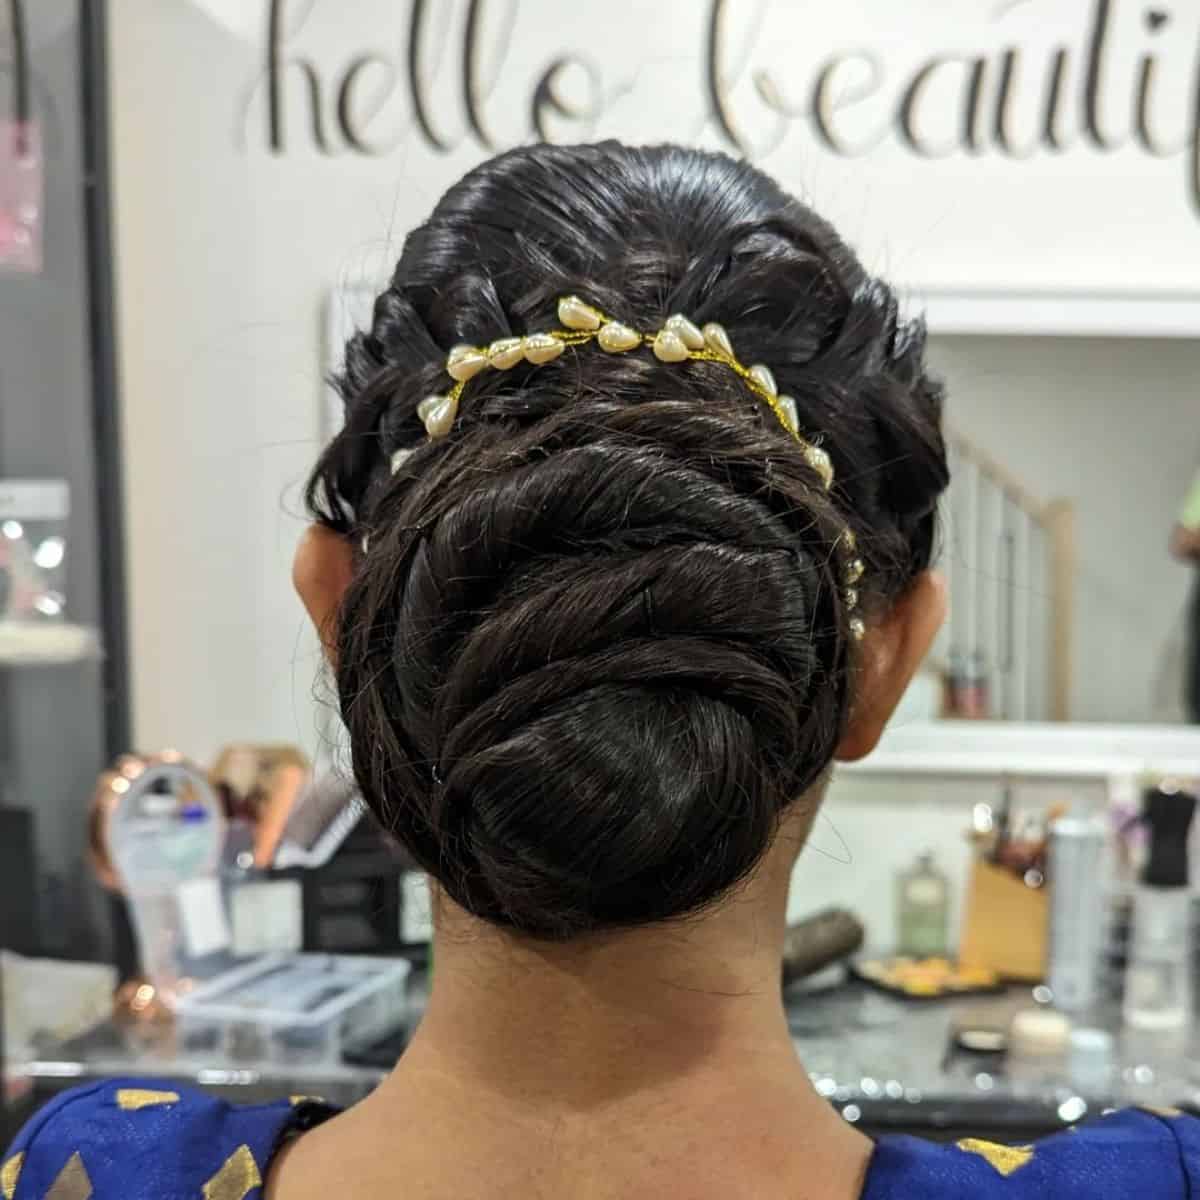 French Braid woman's hairstyle.